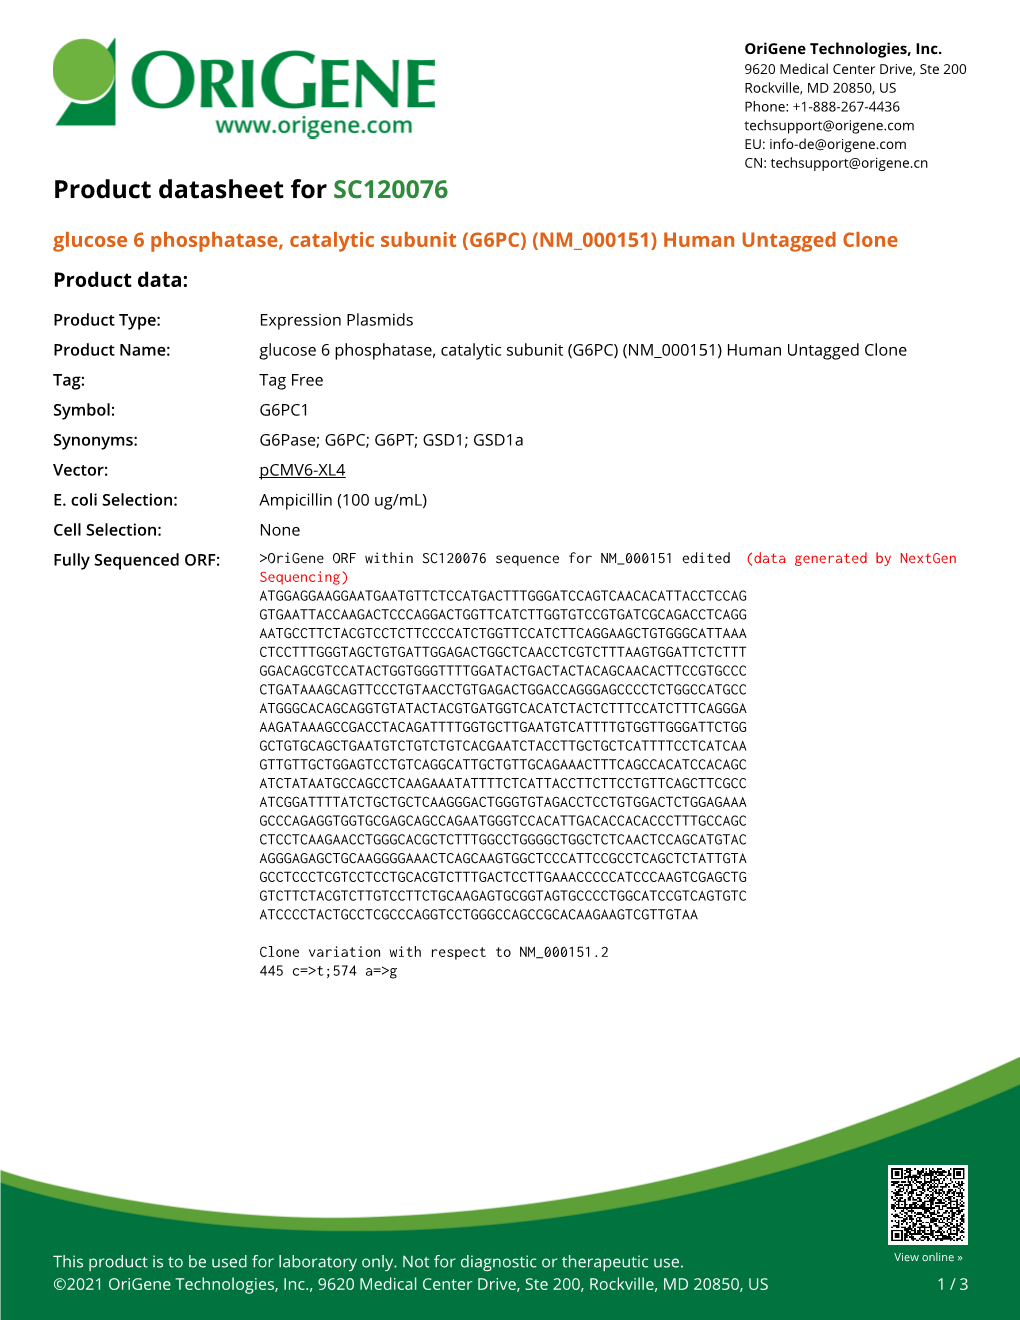 Glucose 6 Phosphatase, Catalytic Subunit (G6PC) (NM 000151) Human Untagged Clone Product Data